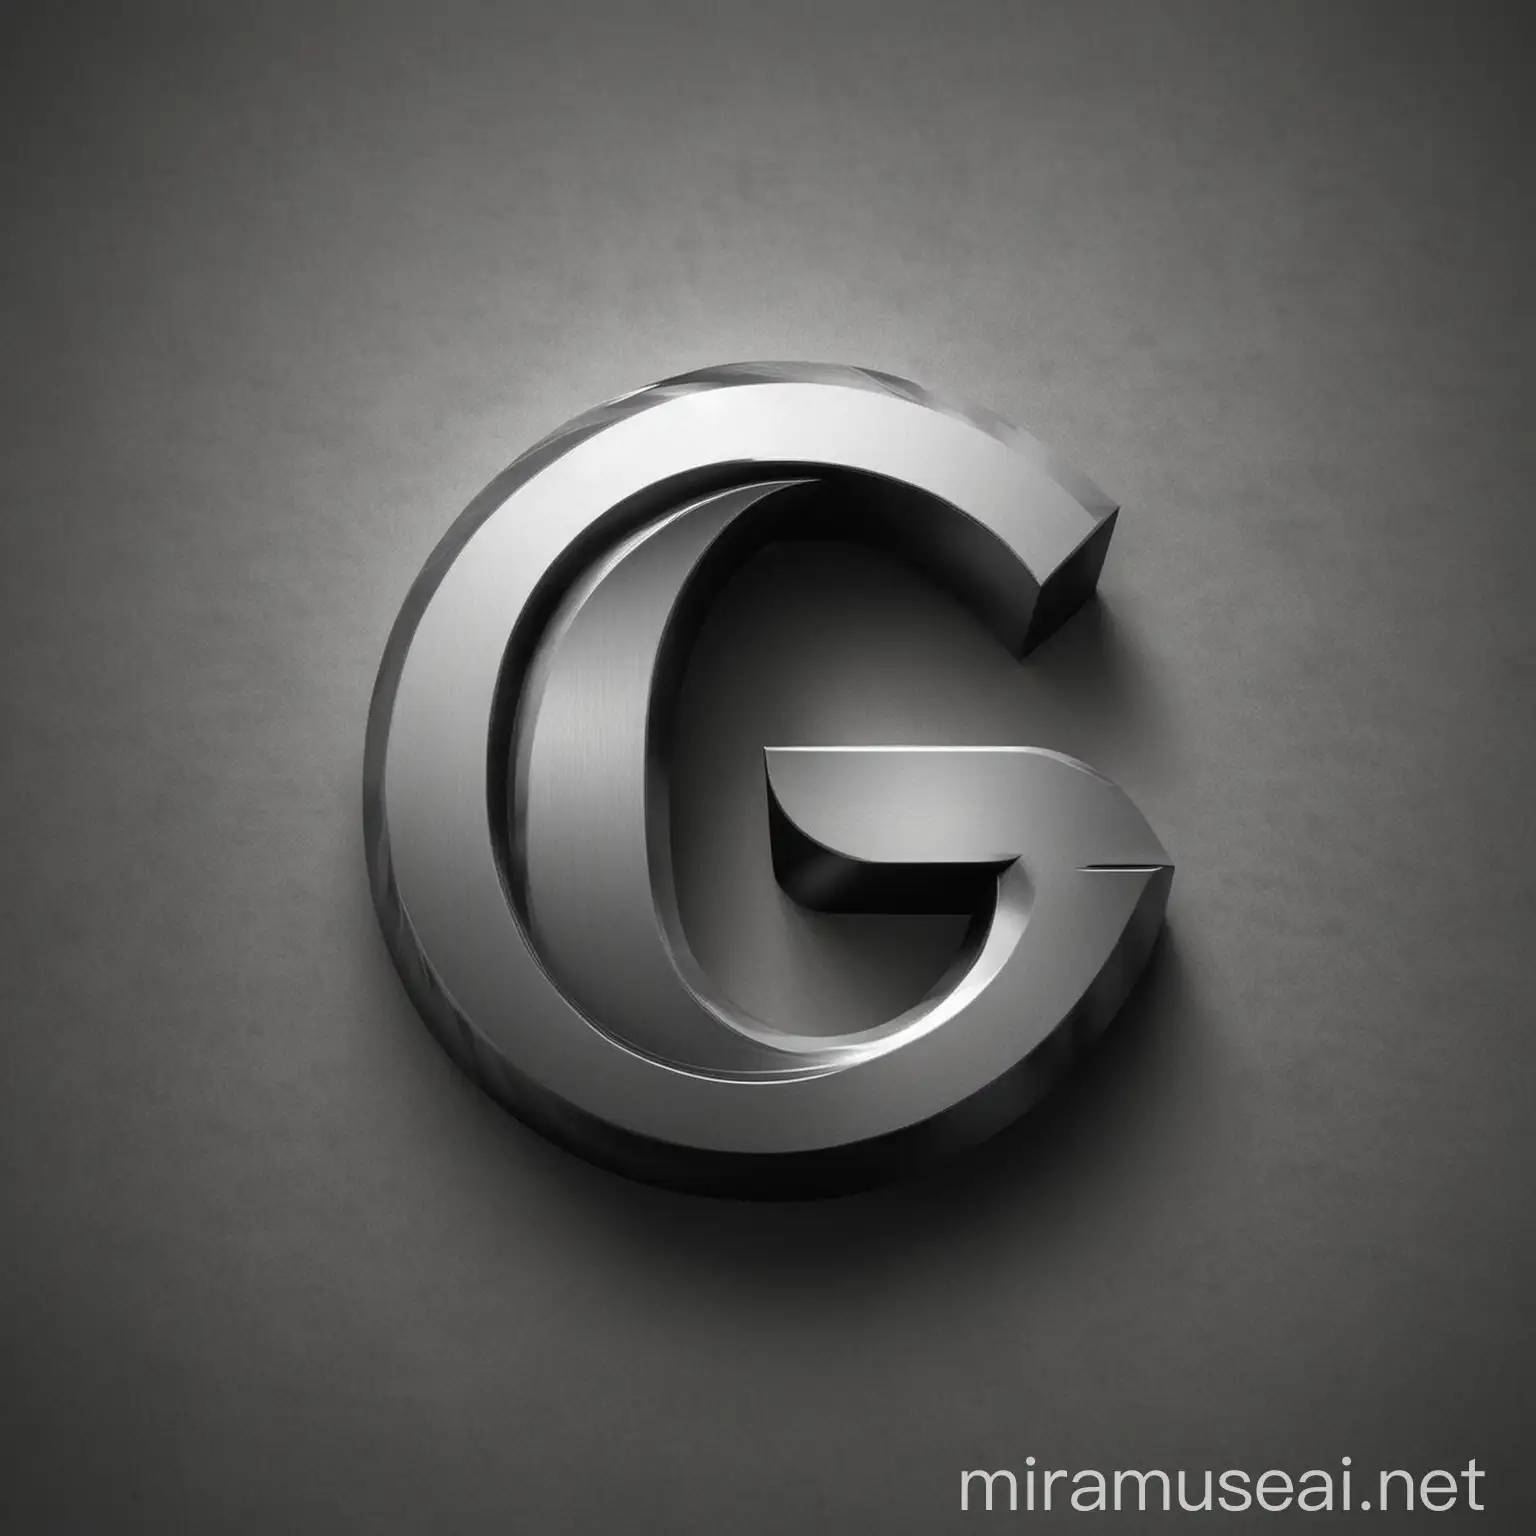 Monochrome Capital G Logo with IT and Technology Theme